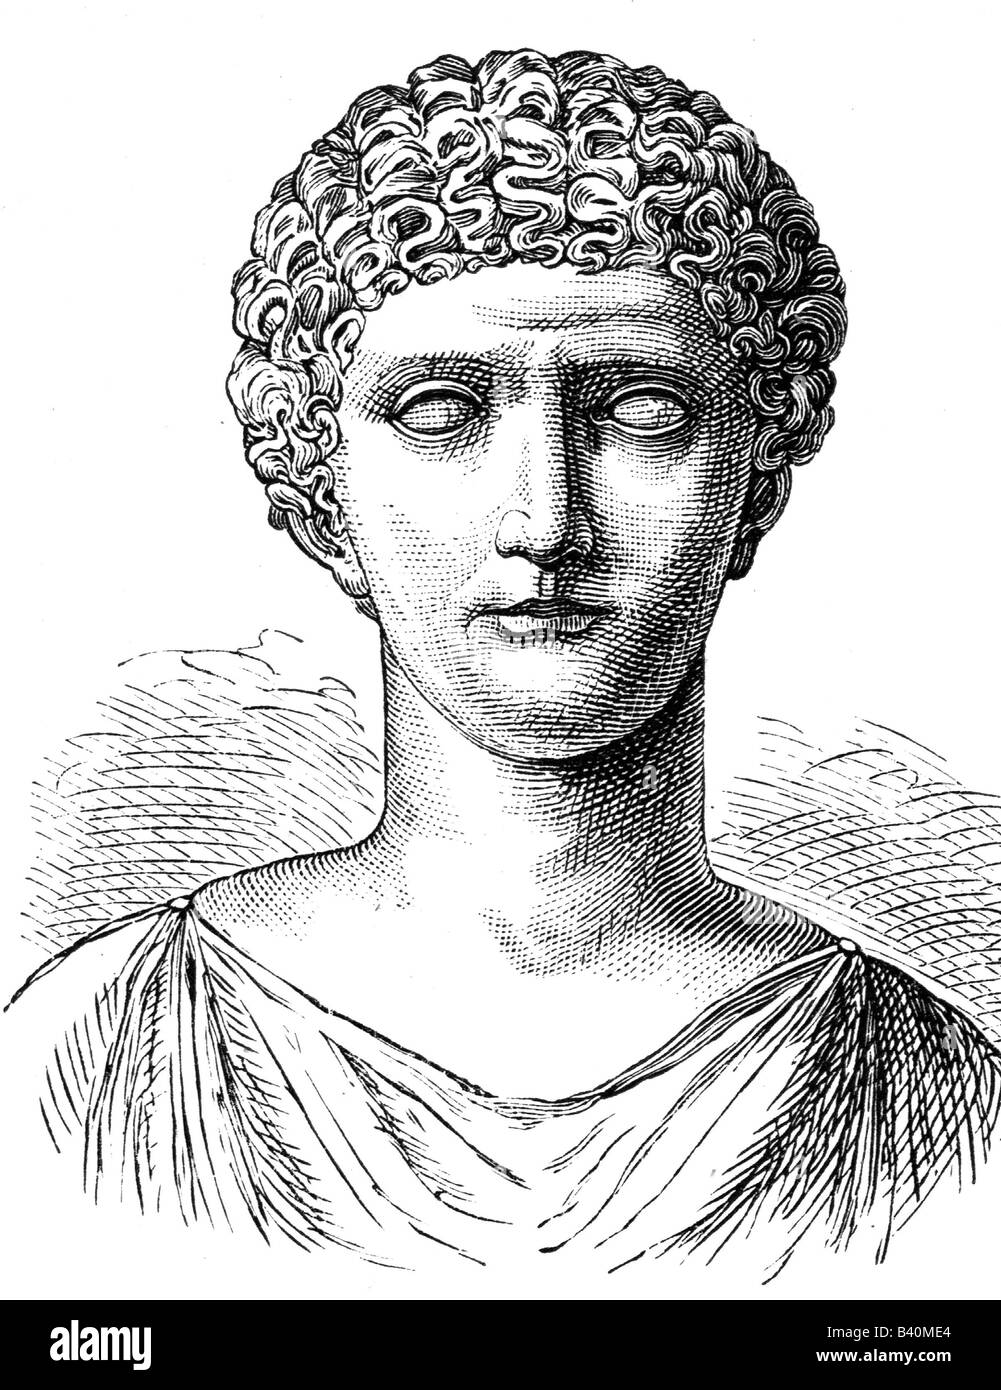 Agripina the Younger (Julia Agrippina), 6.11.15 - 59 A.D., Roman empress, mother of Nero, portrait, bust, wooden engraving after ancient bust, 19th century, Stock Photo